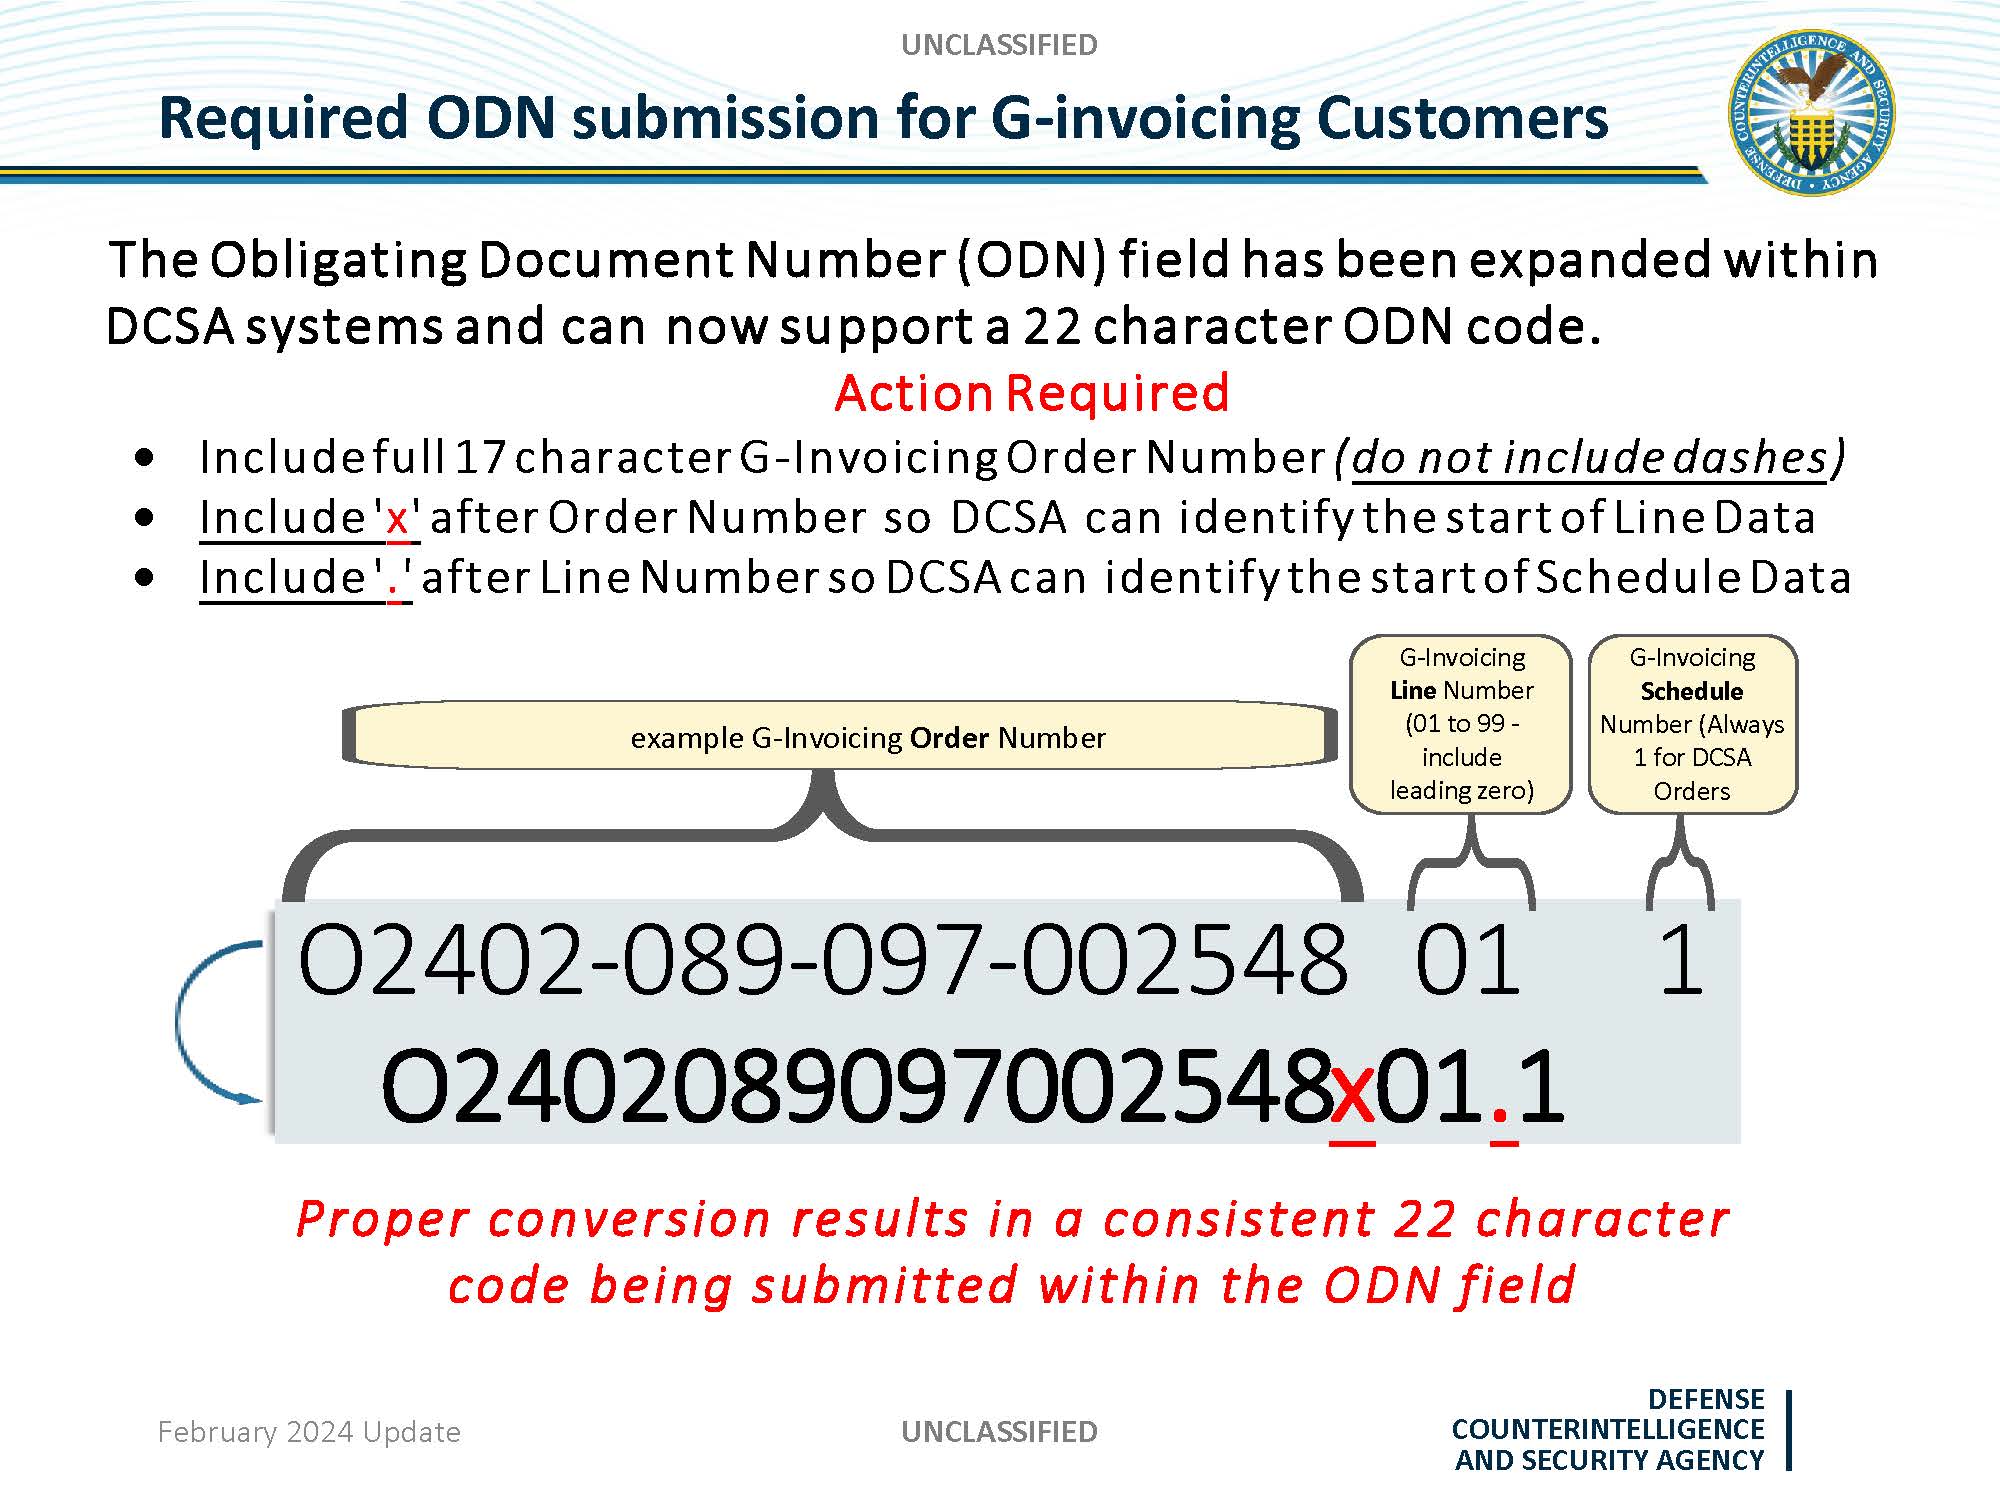 A graphic showing how to convert a G-invoicing Order to e-QIP/eAgency ODN. The top row shows a G-Invoicing Order/Line/Schedule Format. All orders start with the letter O. The next four numbers show year and month the order was created in G-invoicing. The next three numbers are for the buyer-side agency identifier (AID). The next three numbers are for the seller-side agency identifier (AID). The next six numbers are for new orders created in G-invoicing. These 6 numbers reset monthly. The next two numbers show line number of the order (1 to 99). To get the ODN, you omit the "O" and the 3 numbers for seller-side agency identifier (AID) from the G-Invoicing order. If you currently do not have a valid G-Invoicing Order or 7600B, enter "Pending."